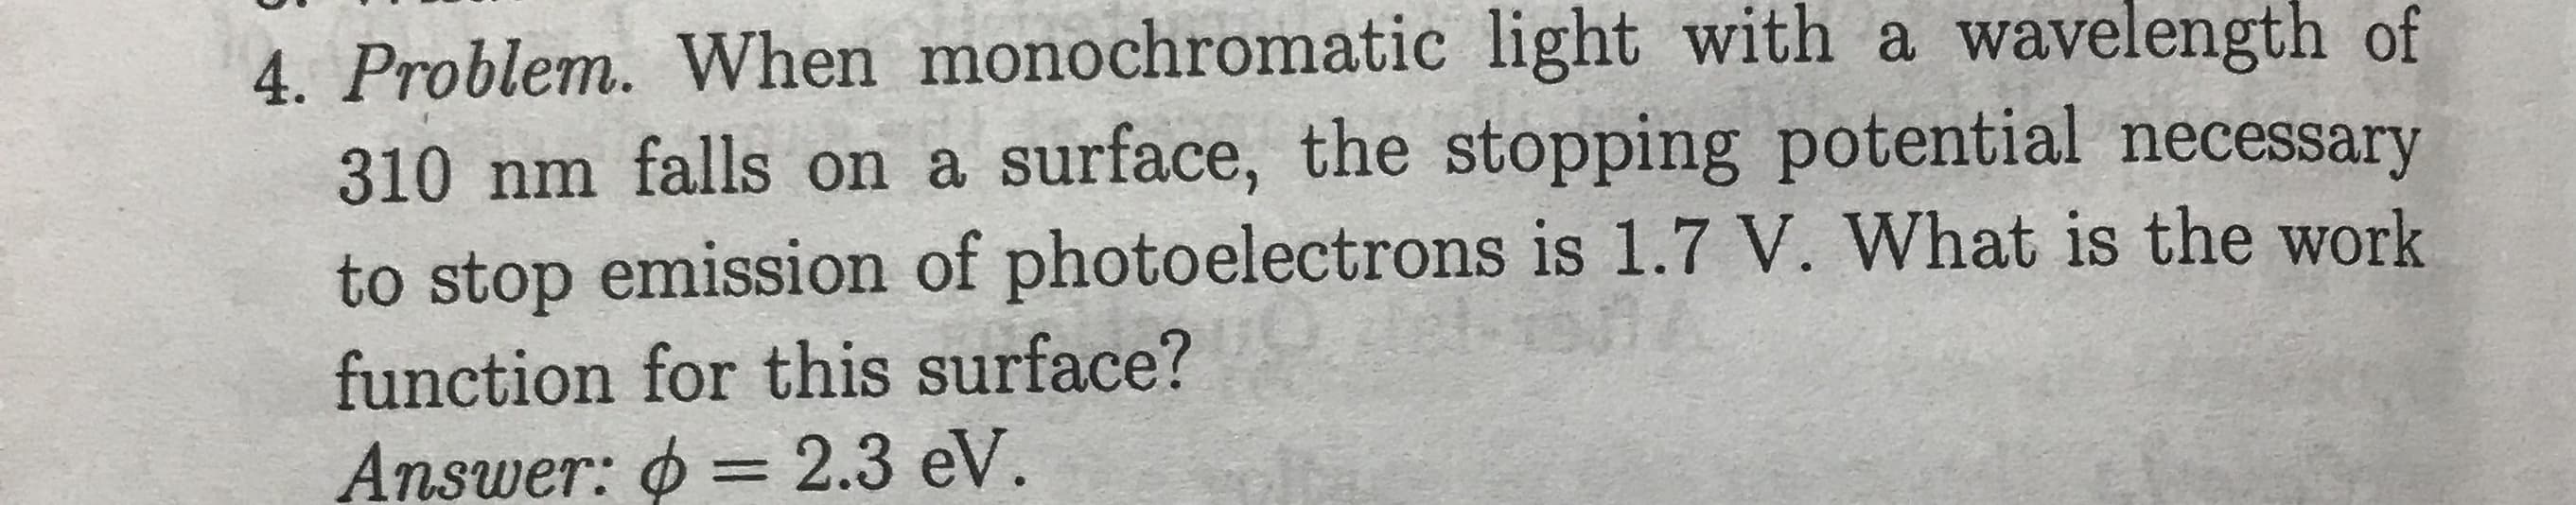 4. Problem. When monochromatic light with a wavelength of
310 nm falls on a surface, the stopping potential necessary
to stop emission of photoelectrons is 1.7 V. What is the work
function for this surface?
= 2.3 eV.
Answer:
%3D
